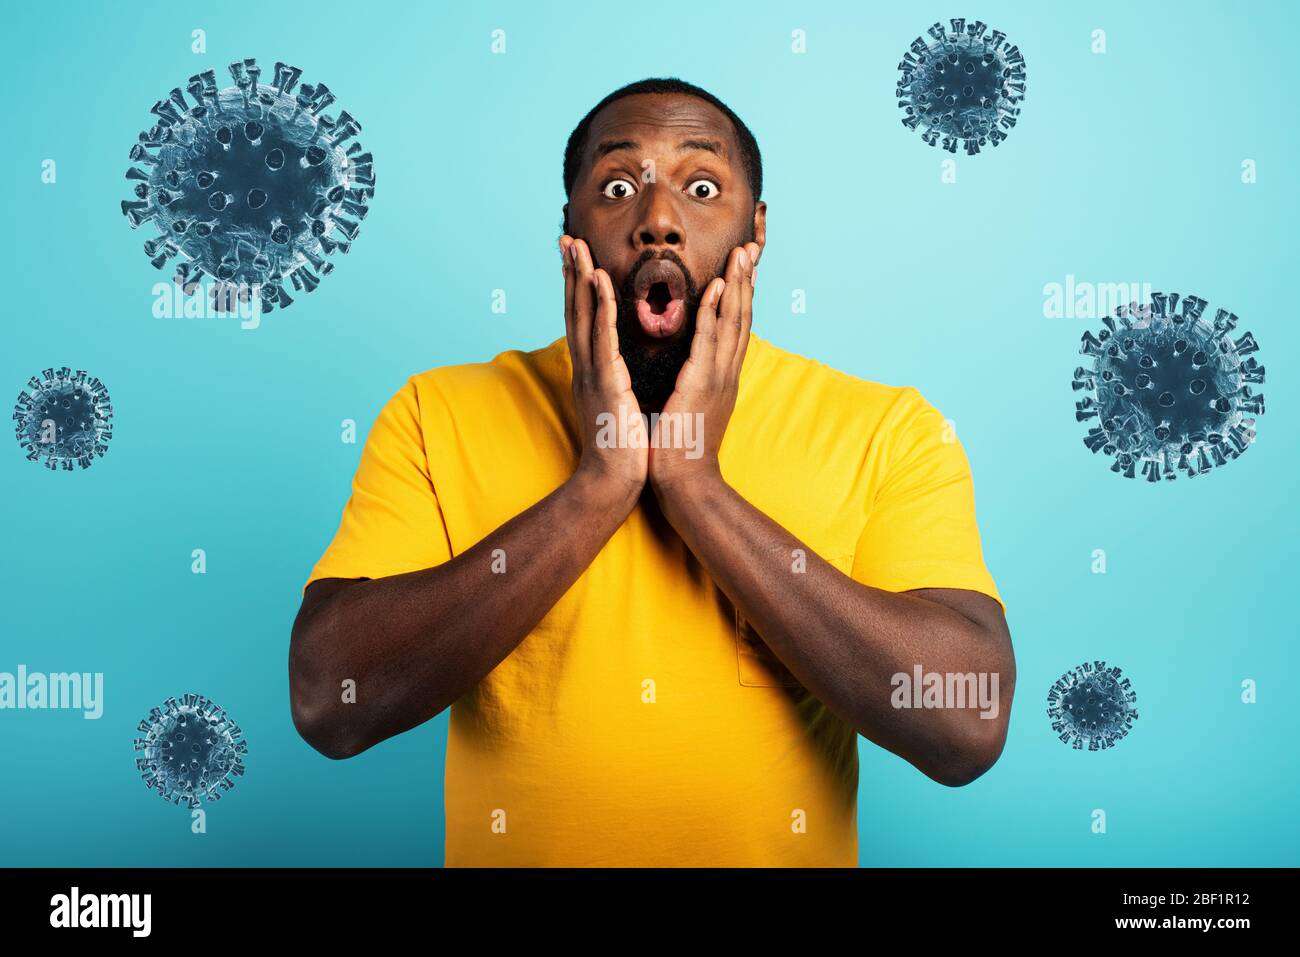 Fearful expression of a boy who is scared to catch the coronavirus. Cyan background. Stock Photo